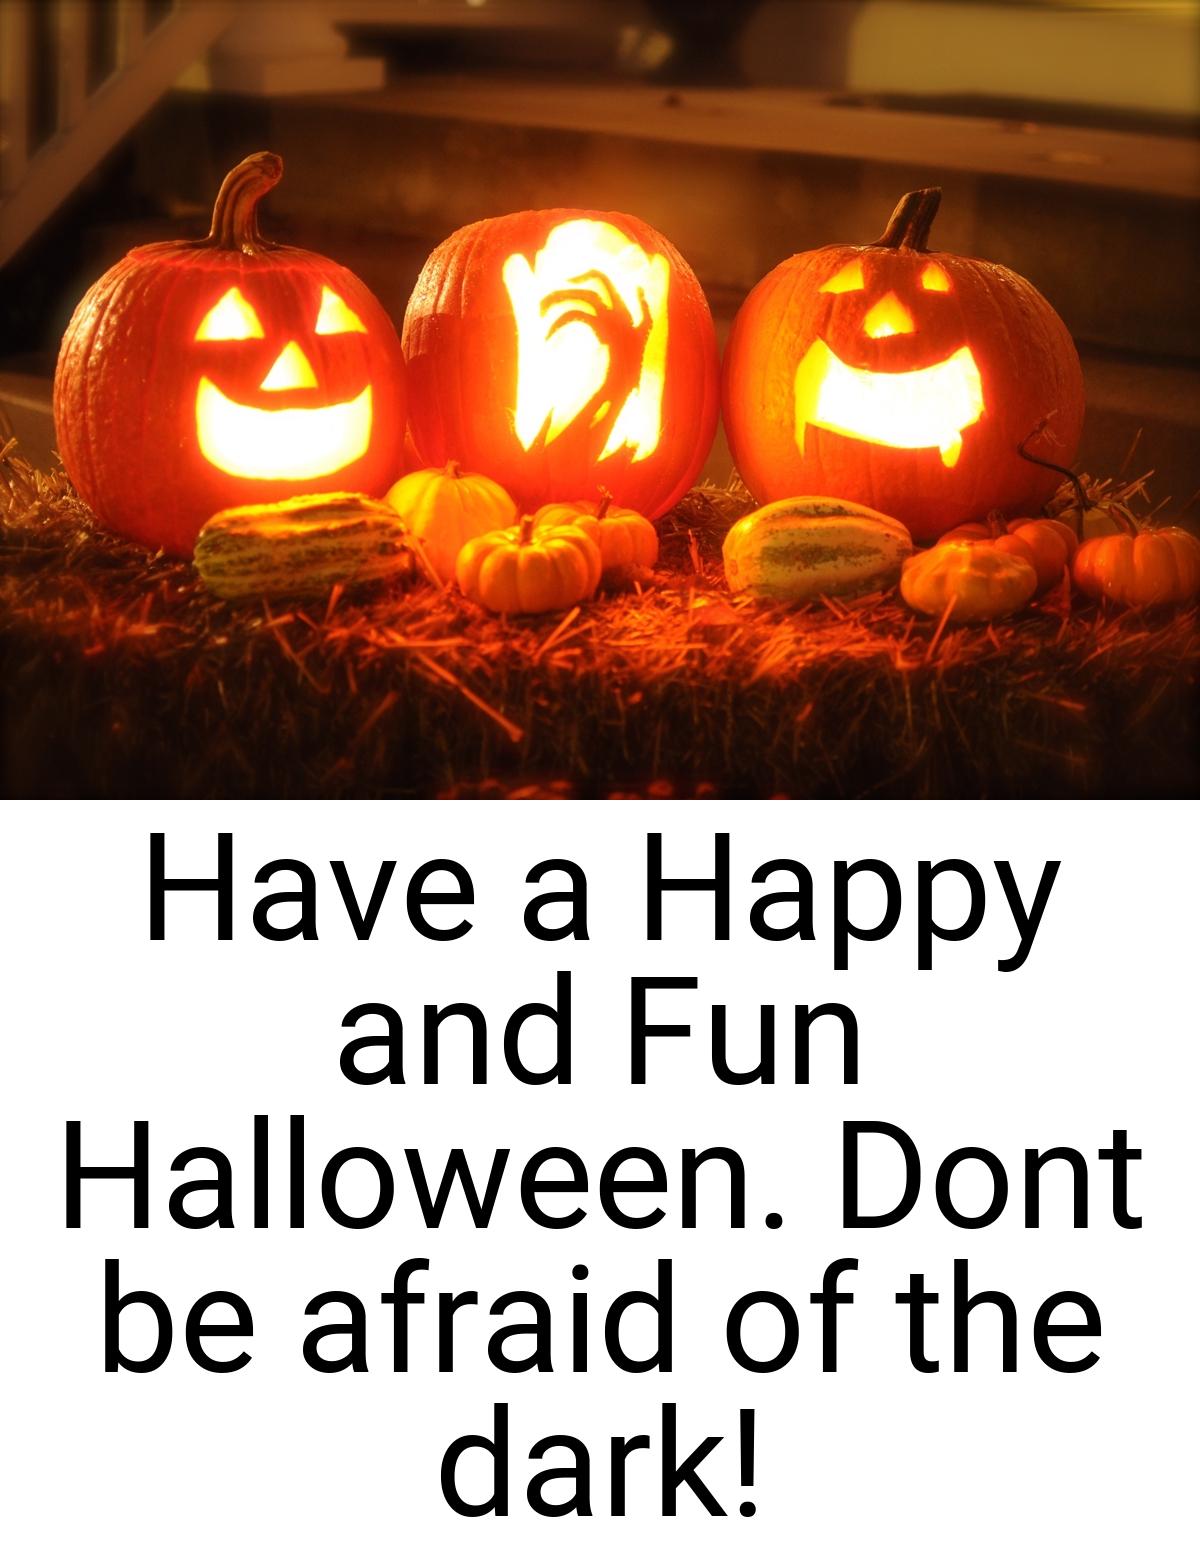 Have a Happy and Fun Halloween. Dont be afraid of the dark